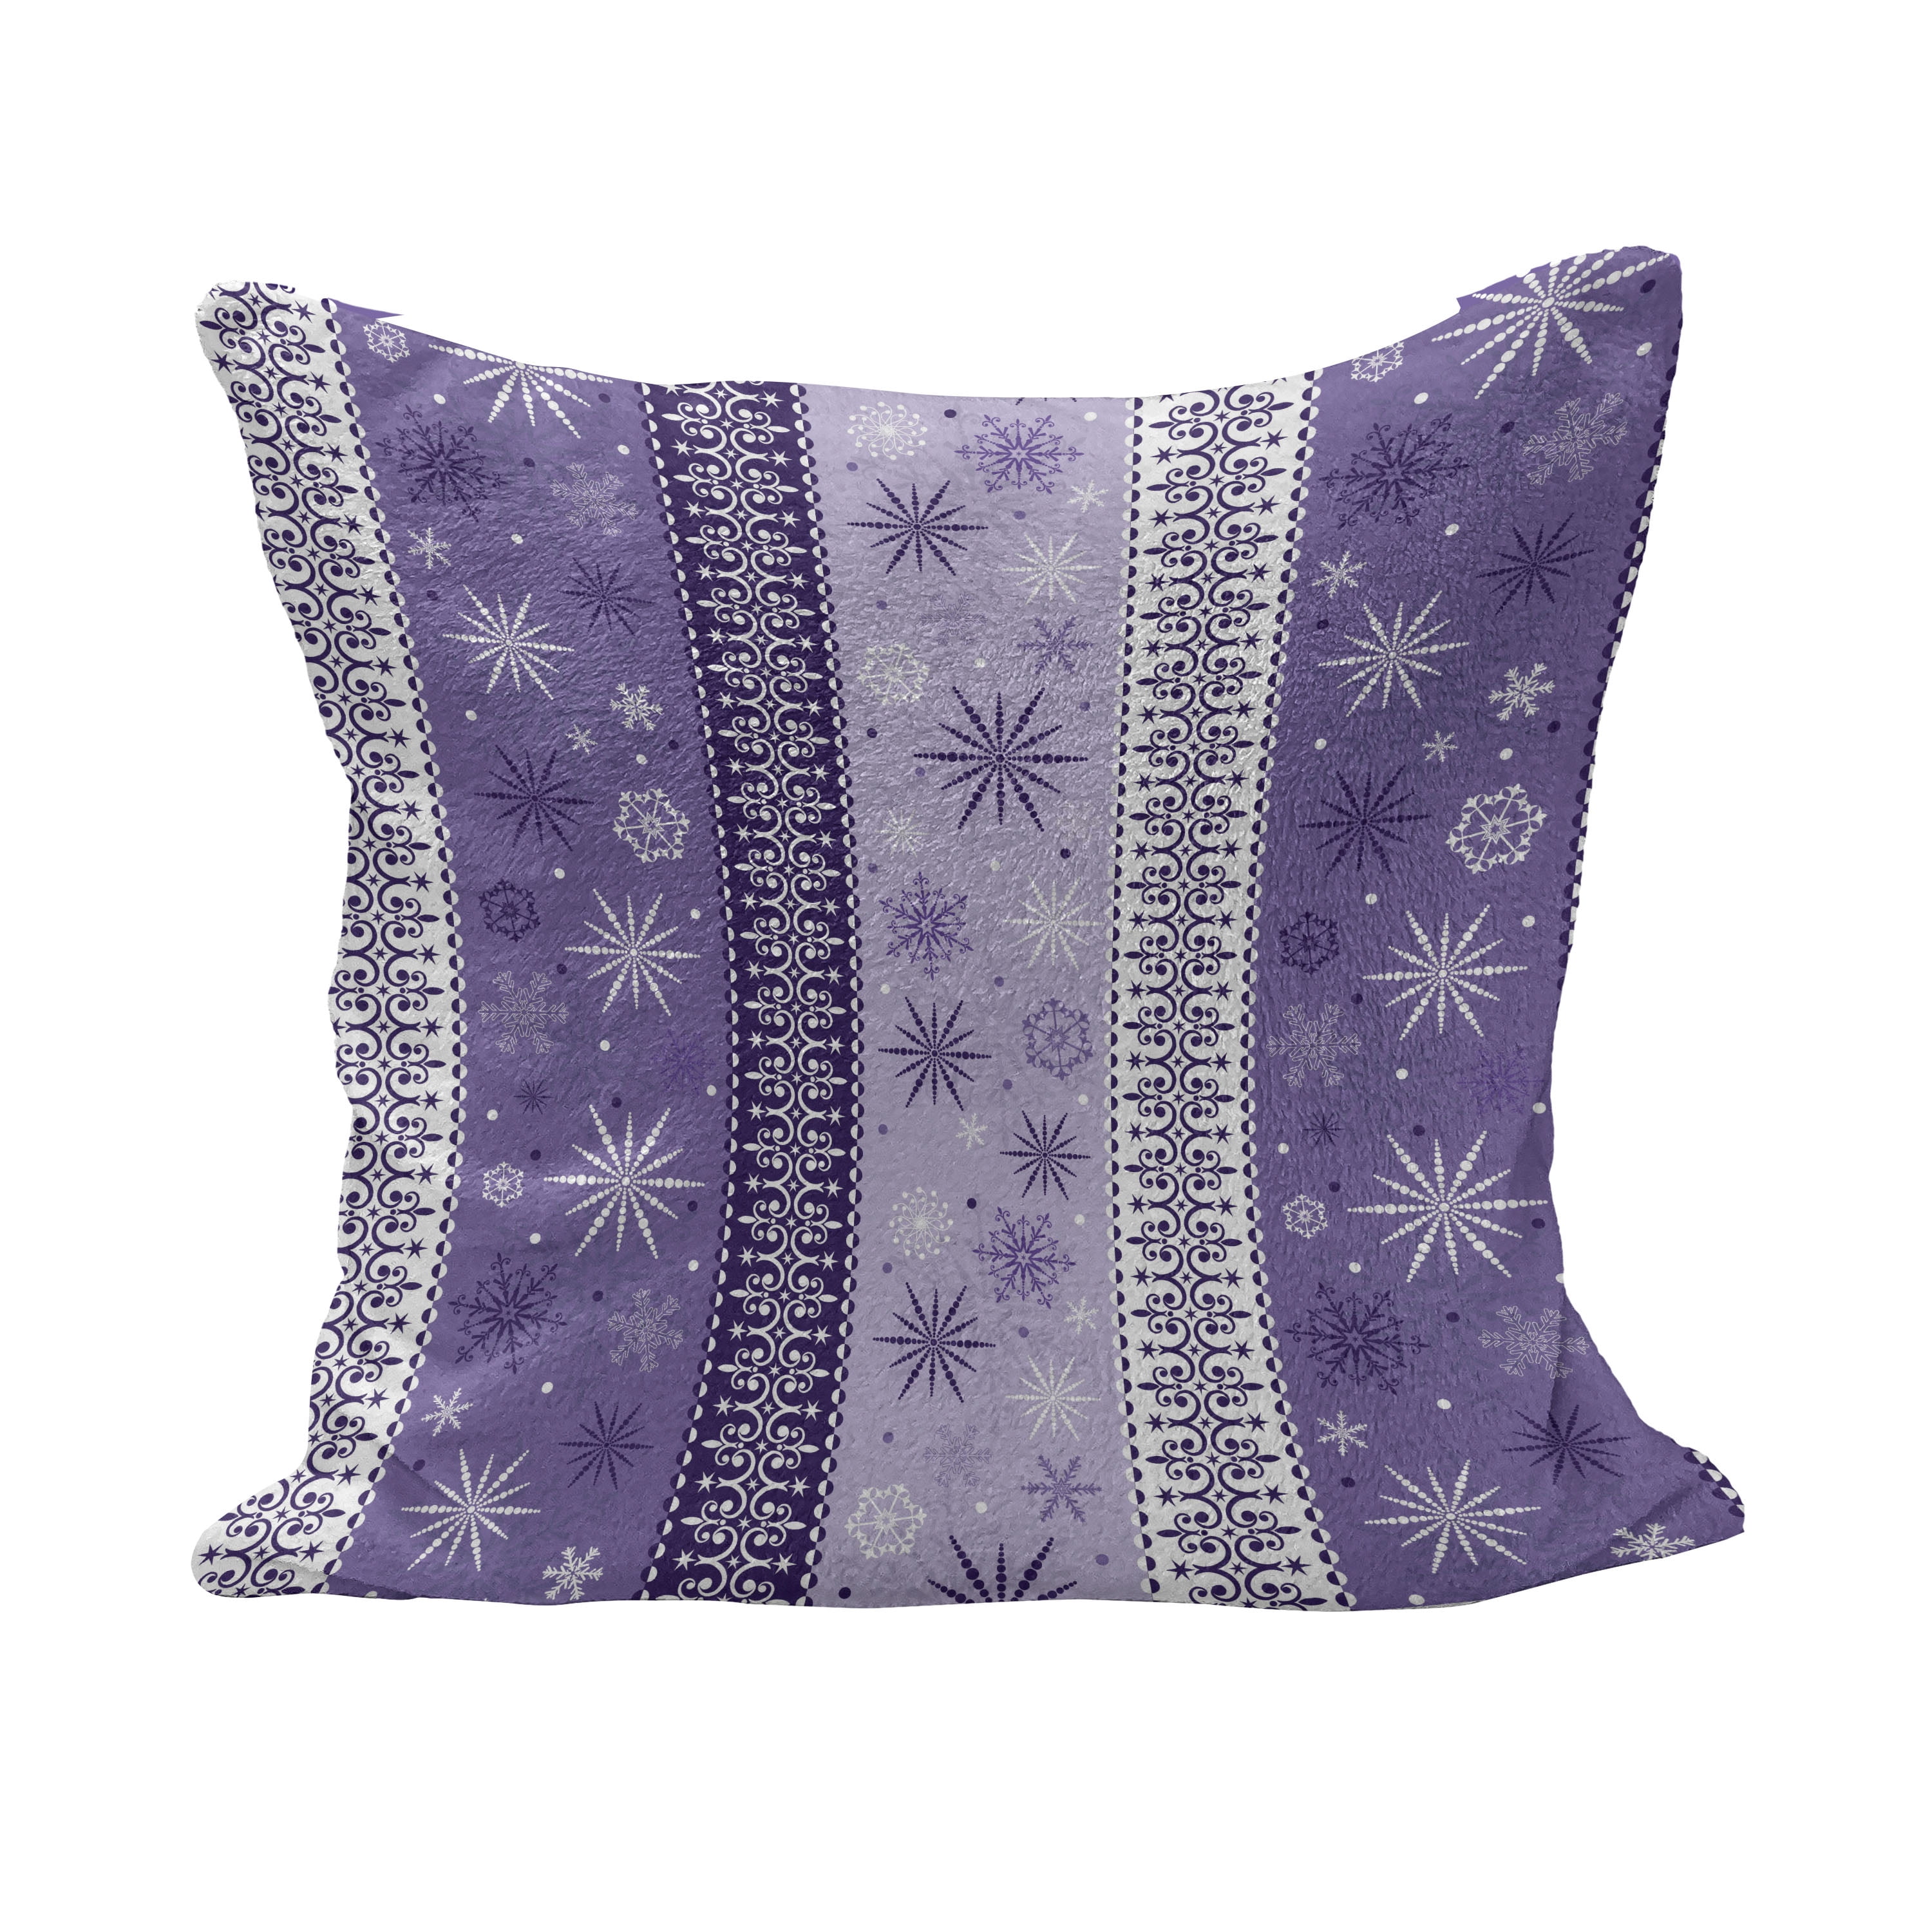 Blue Purple Snowflake/Christmas/Winte/16" x 16" or 18"x18"/ Flannel Pillow Cover 